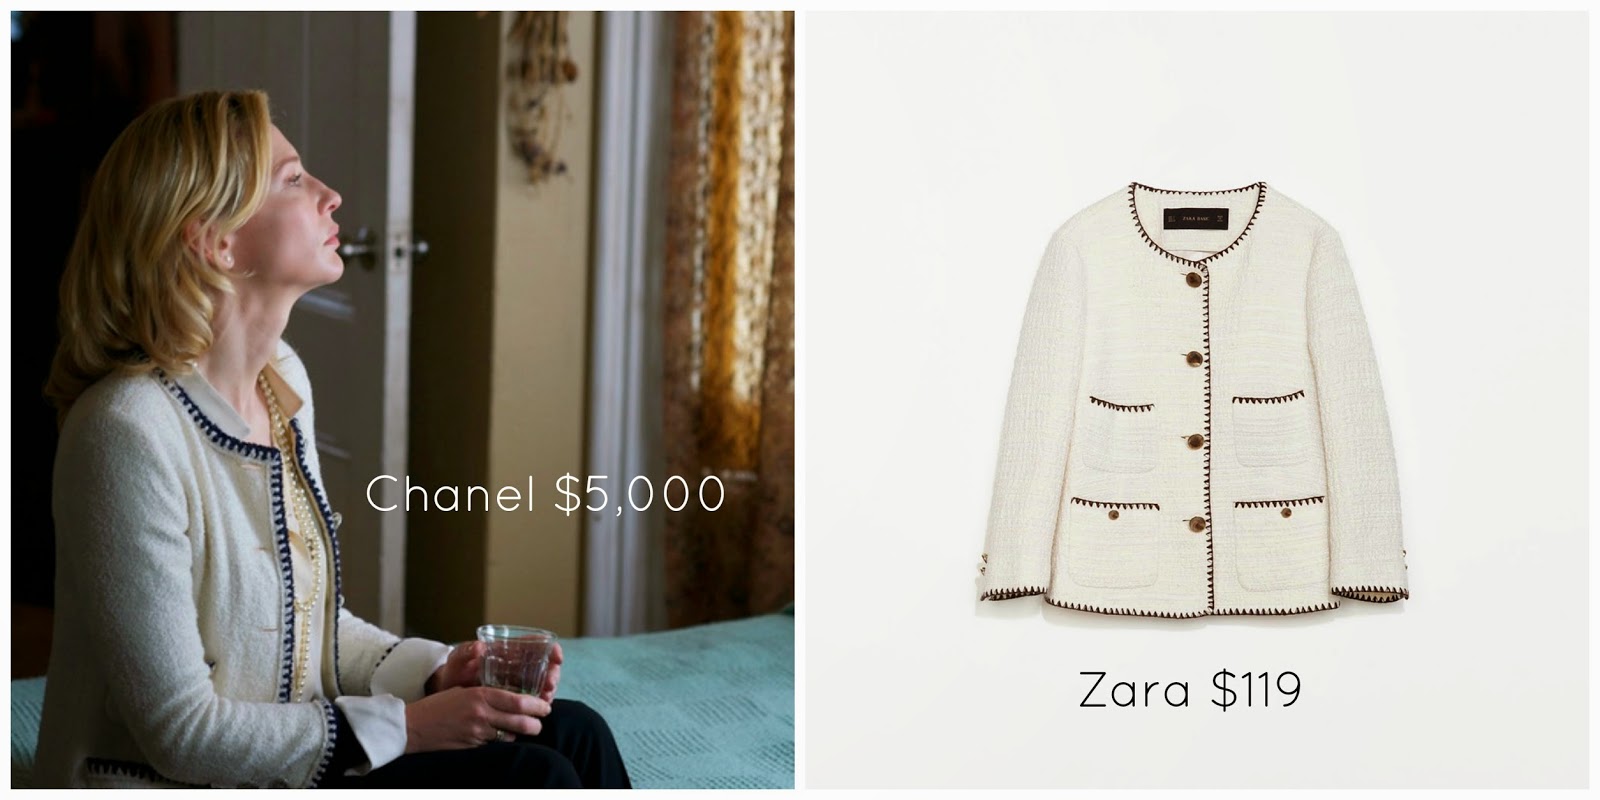 The Room: Zara Does Chanel